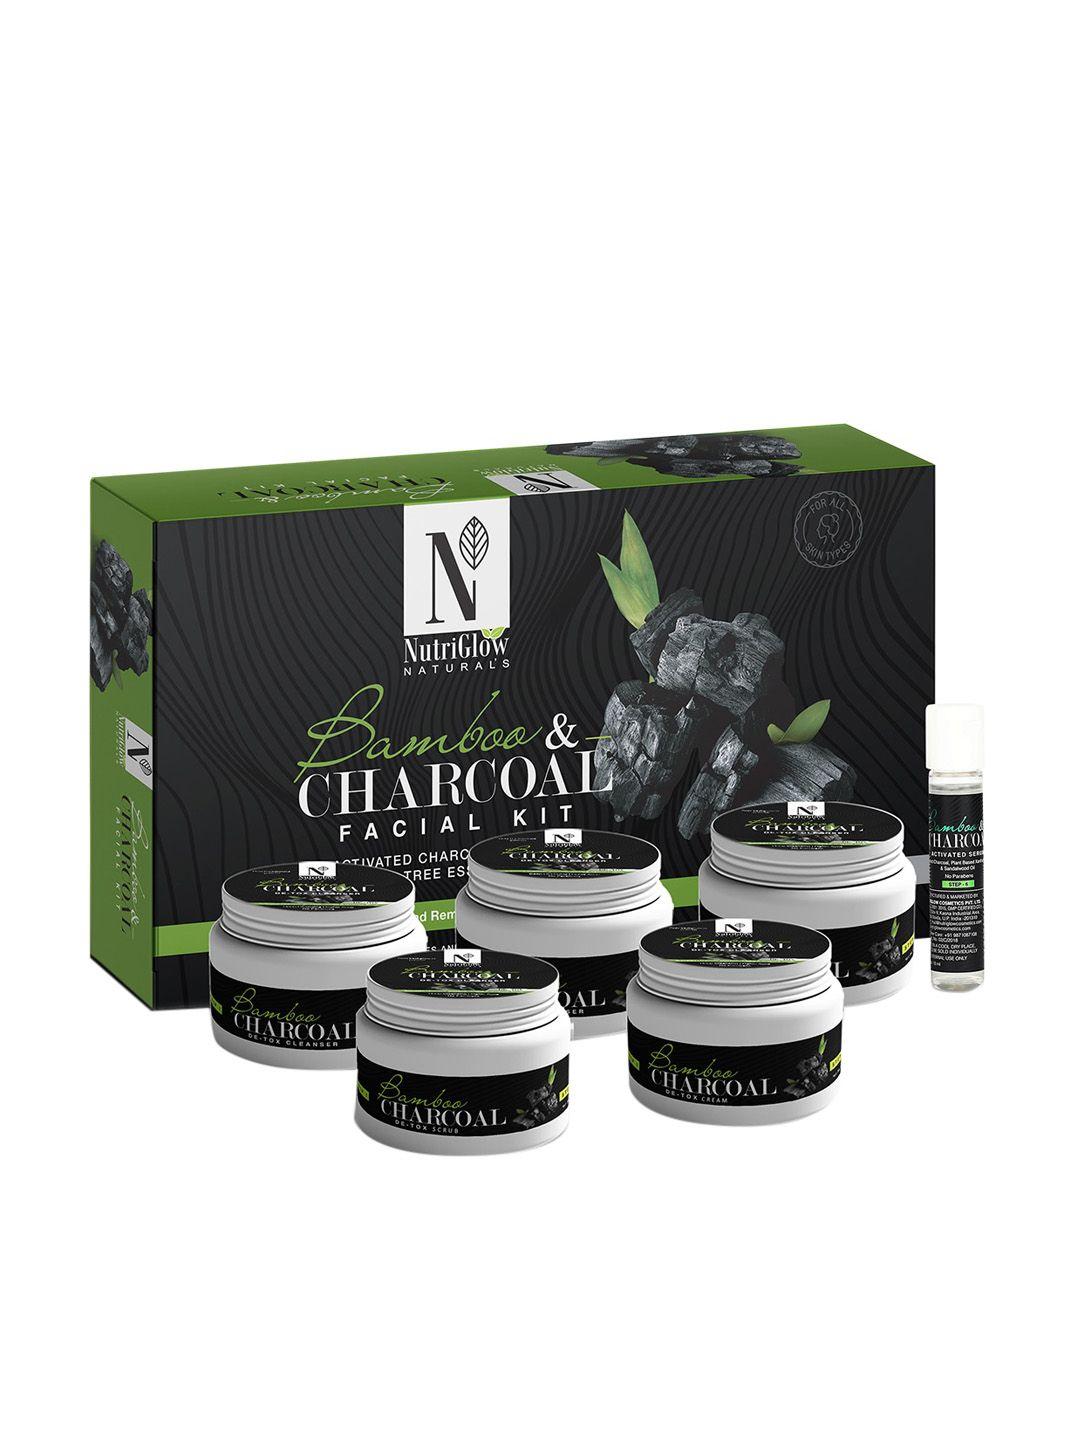 nutriglow-sustainable-naturals--bamboo-&-charcoal-facial-kit-250g+10ml